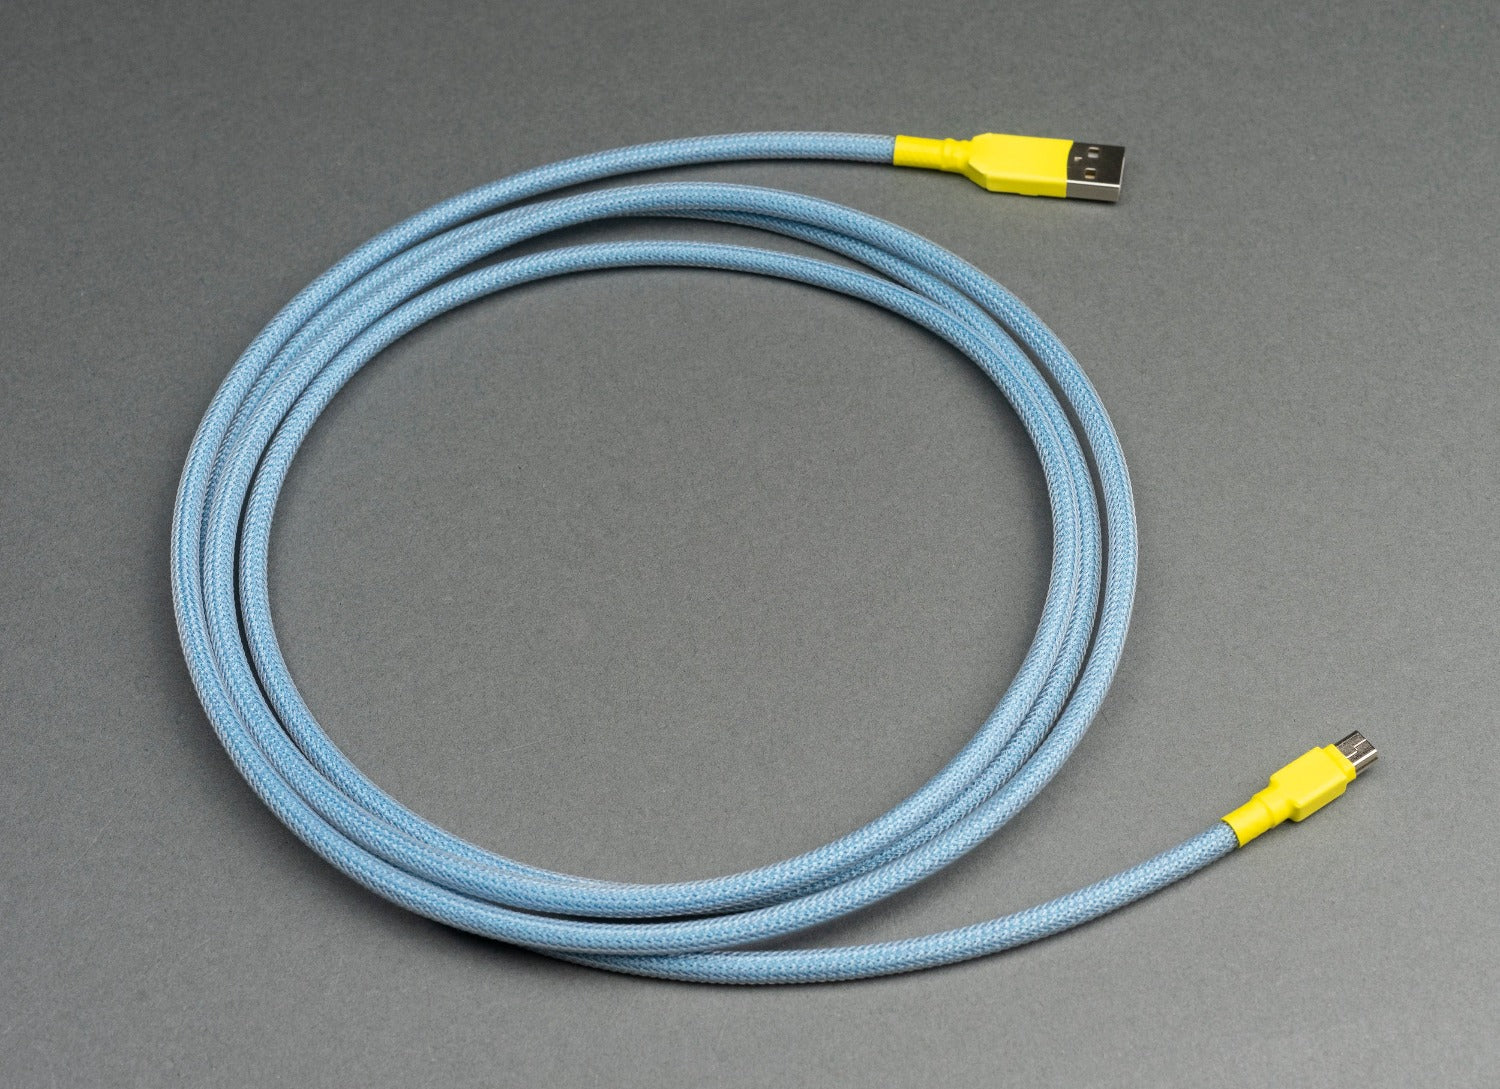 Godspeed Themed Mechanical Keyboard Cable